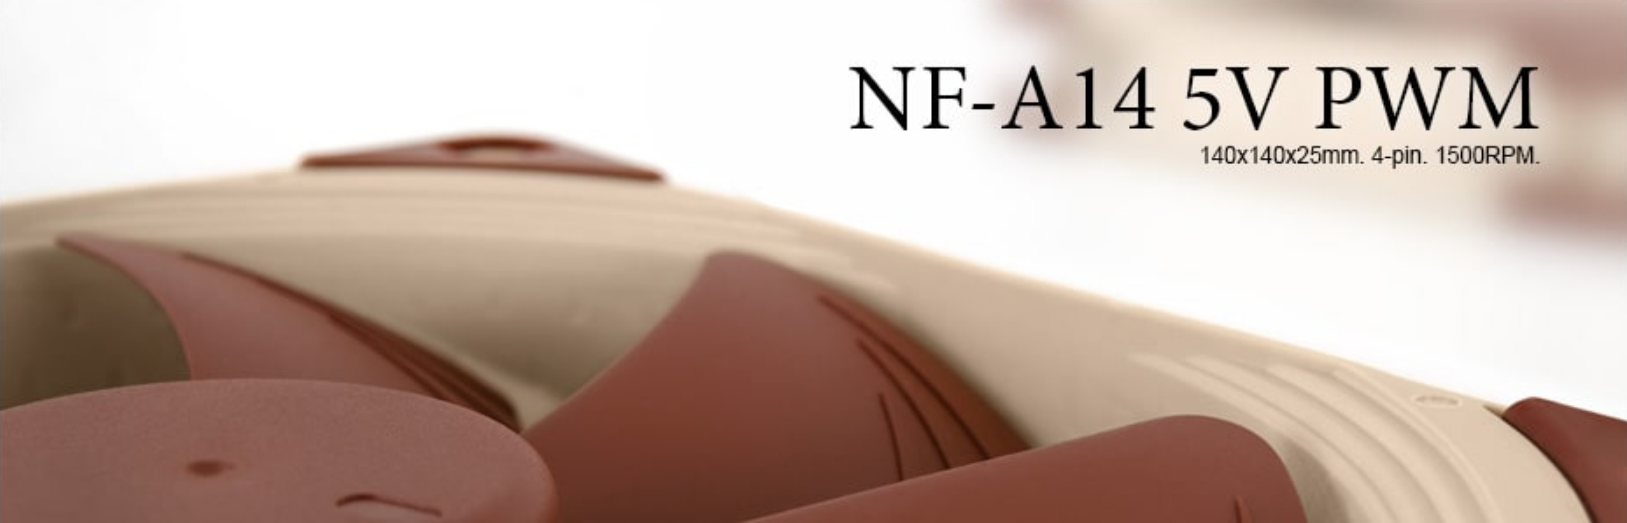 A large marketing image providing additional information about the product Noctua NF-A14 5V PWM 140mm x 25mm 1500RPM Cooling Fan - Additional alt info not provided